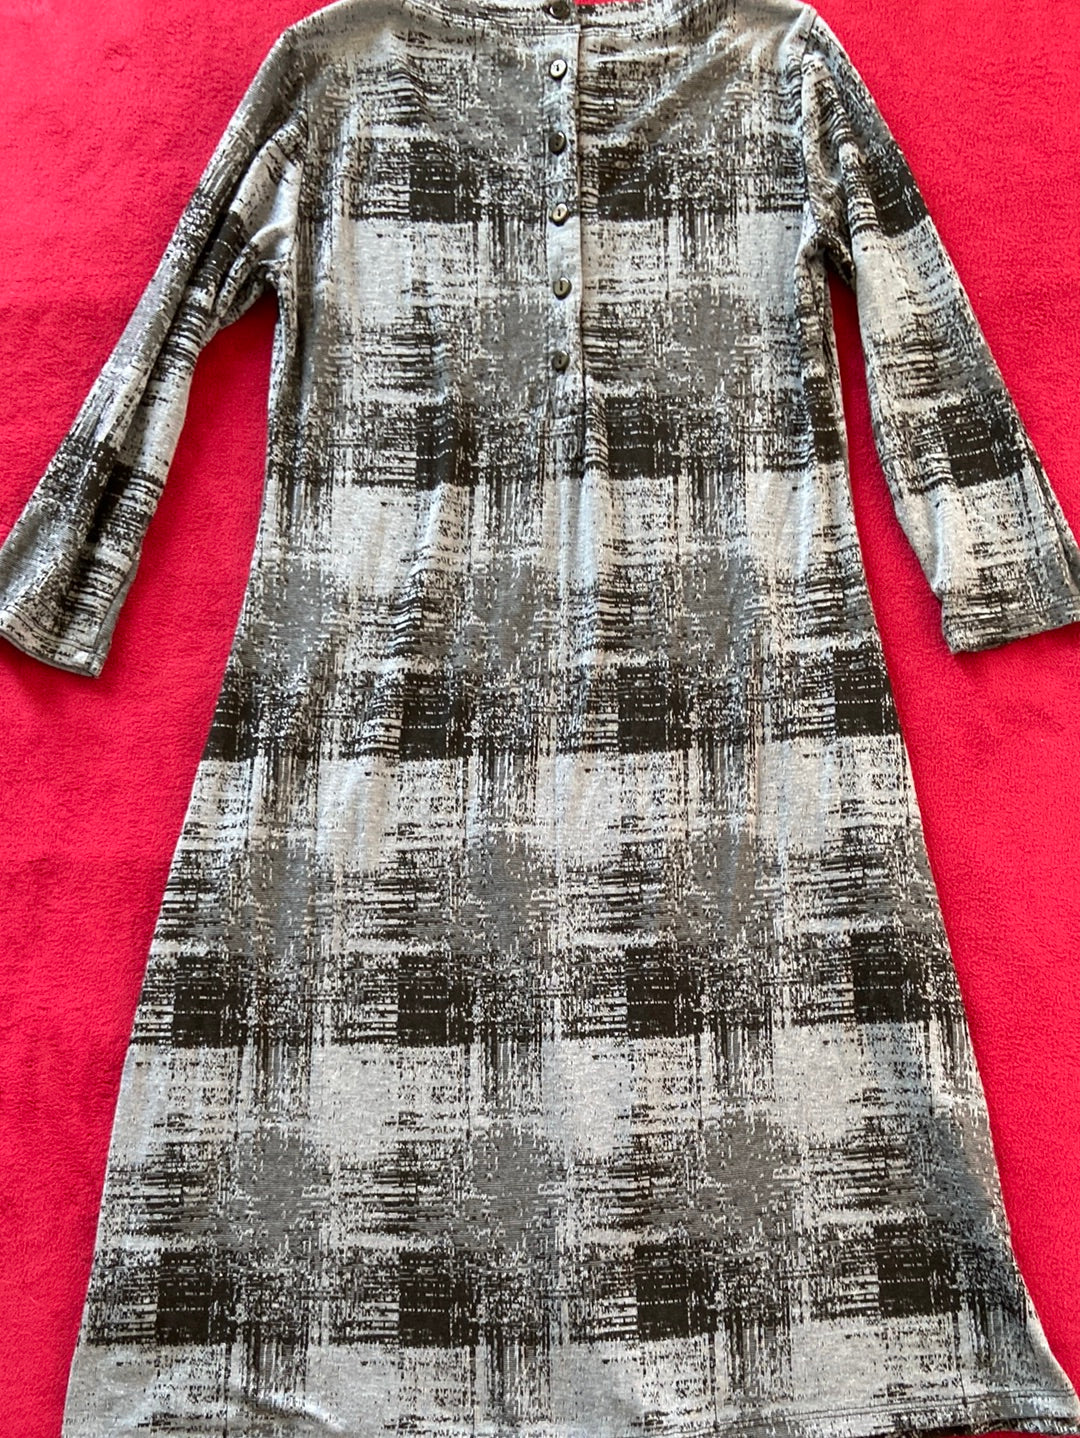 ABSTRACT GRAY Cut Loose Dress Size XS